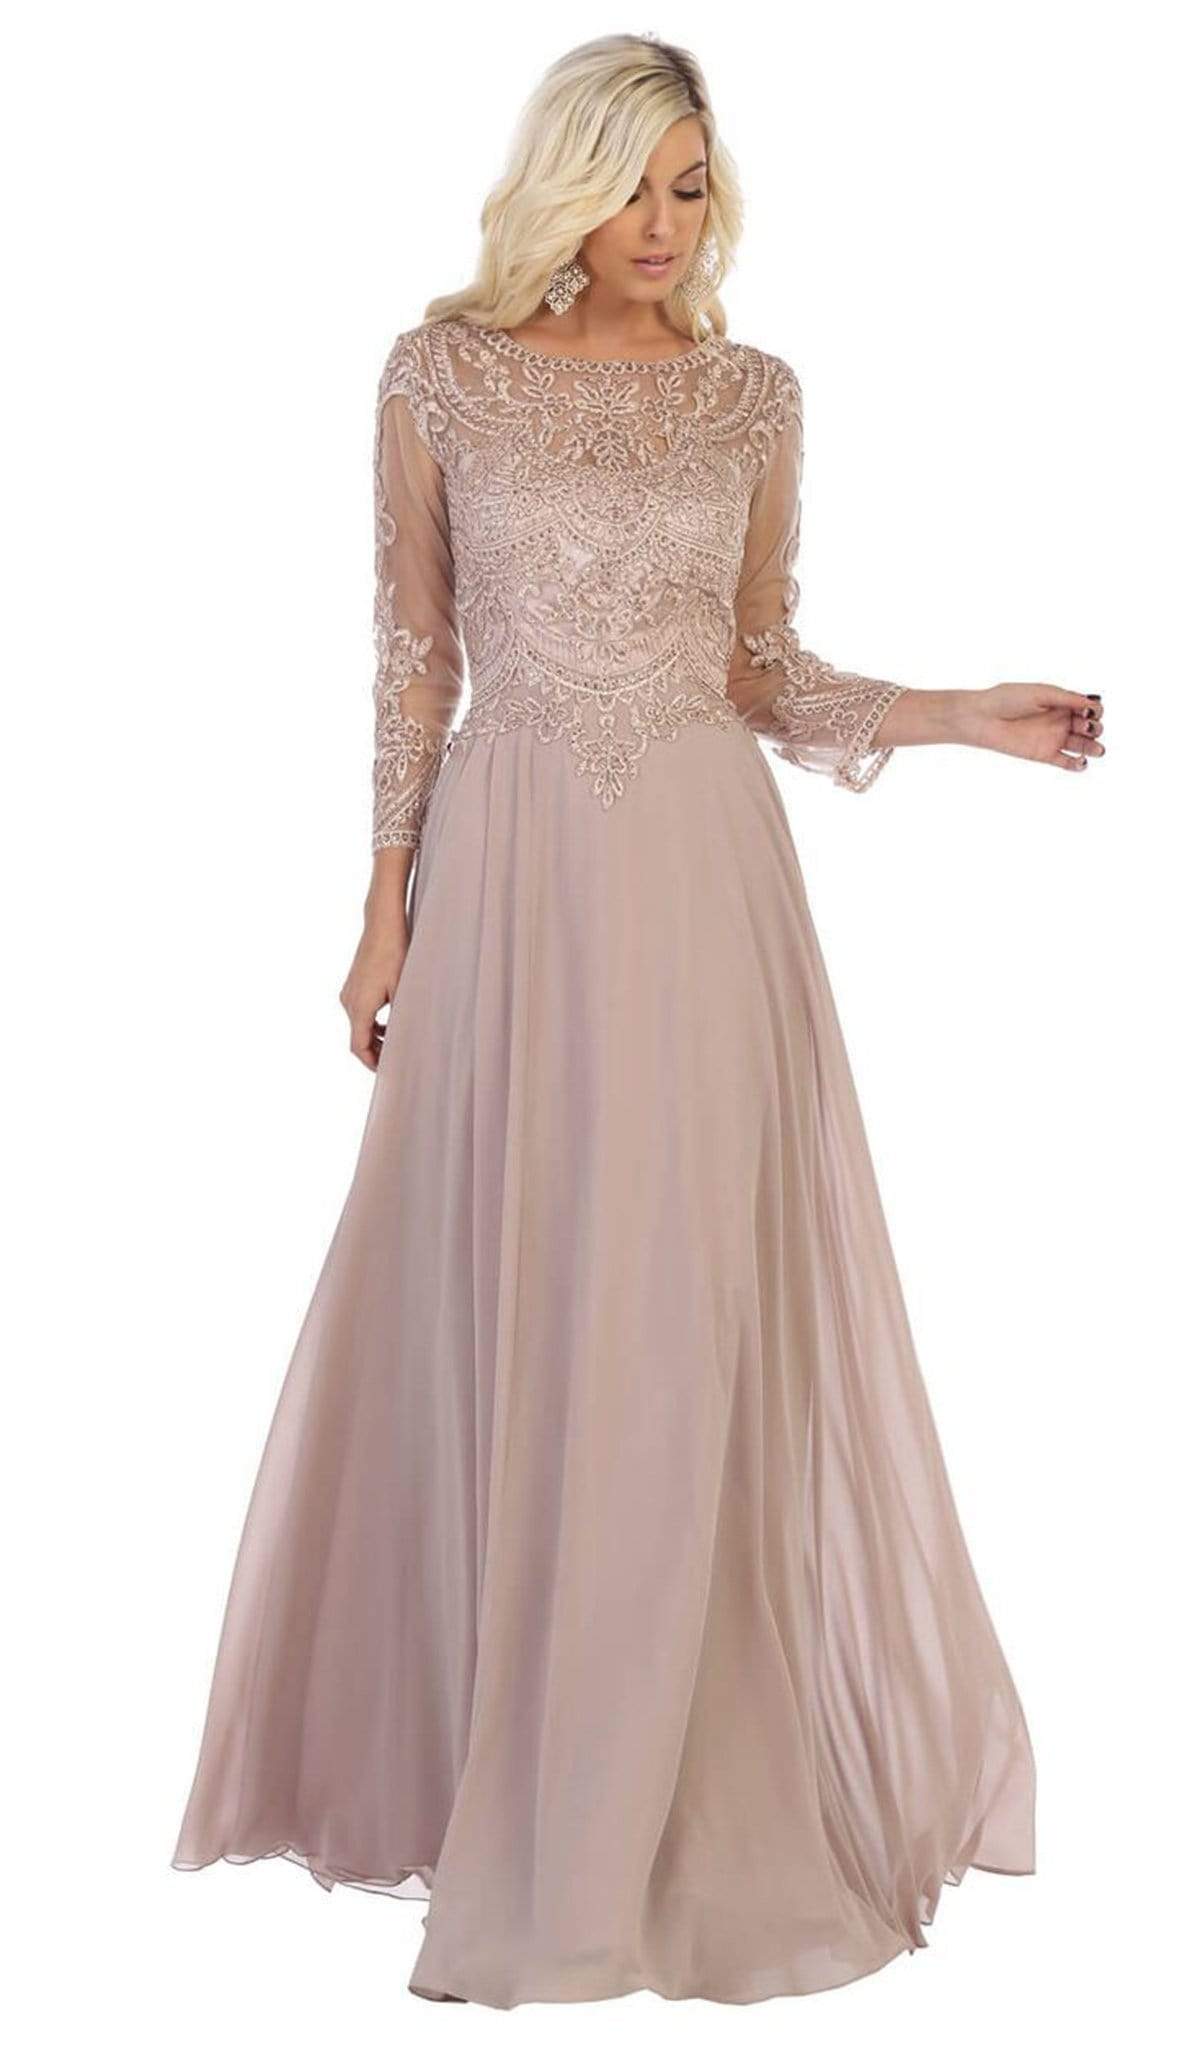 May Queen - MQ1615 Embroidered Long Sleeve Bateau A-line Dress
